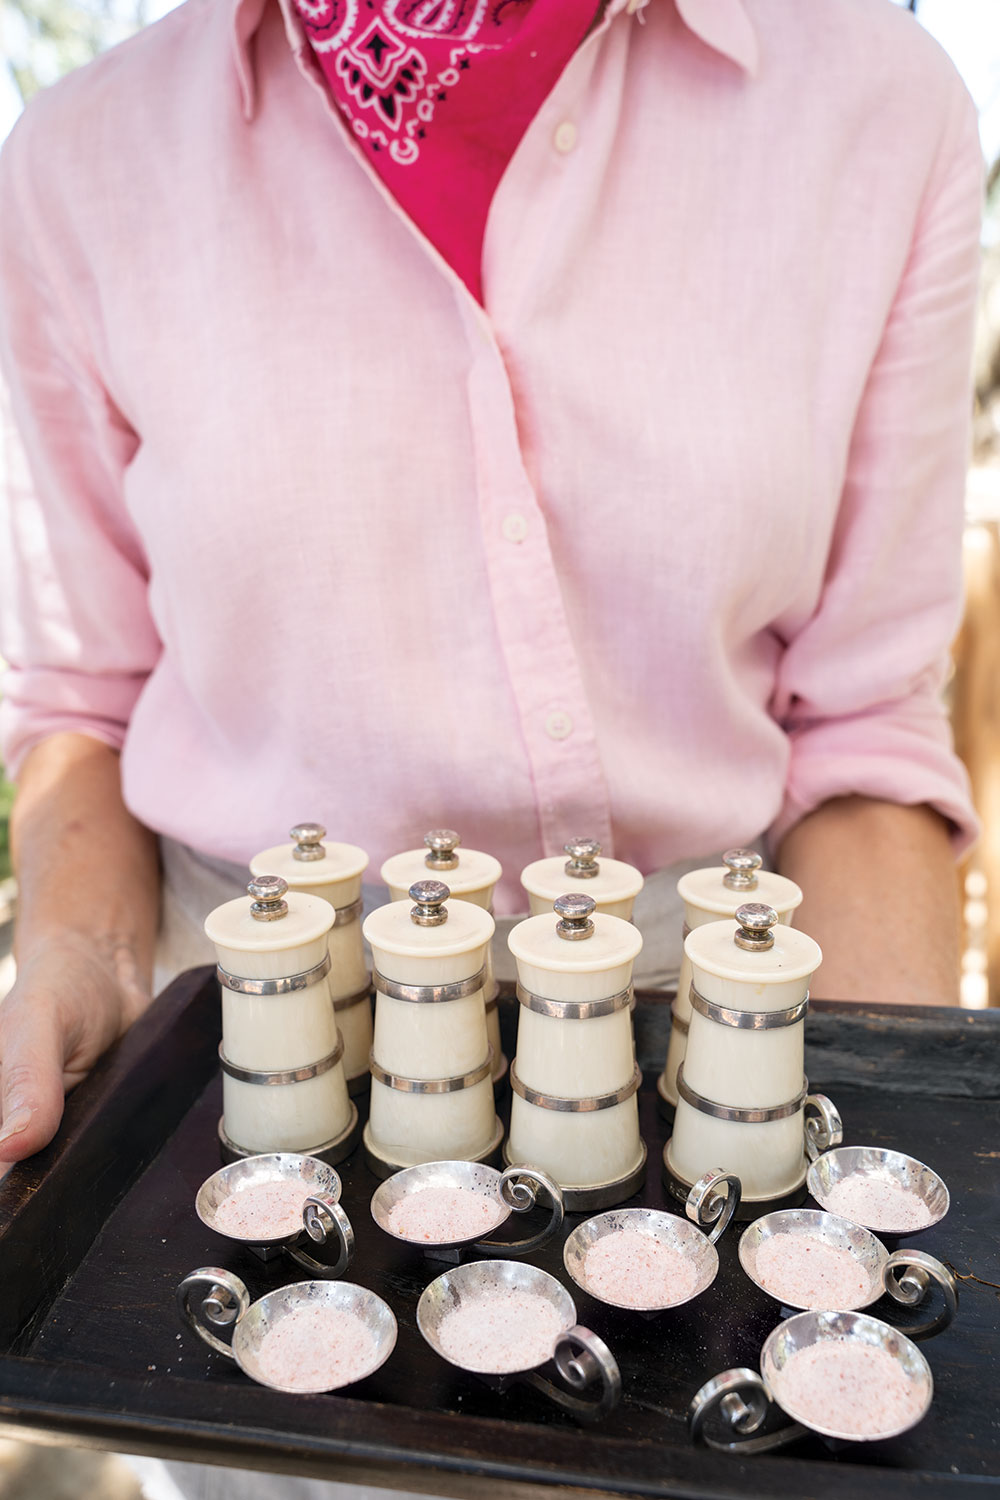 Woman in pink top with hot pink bandana holding a tray of silver salt cellars and pepper grinders